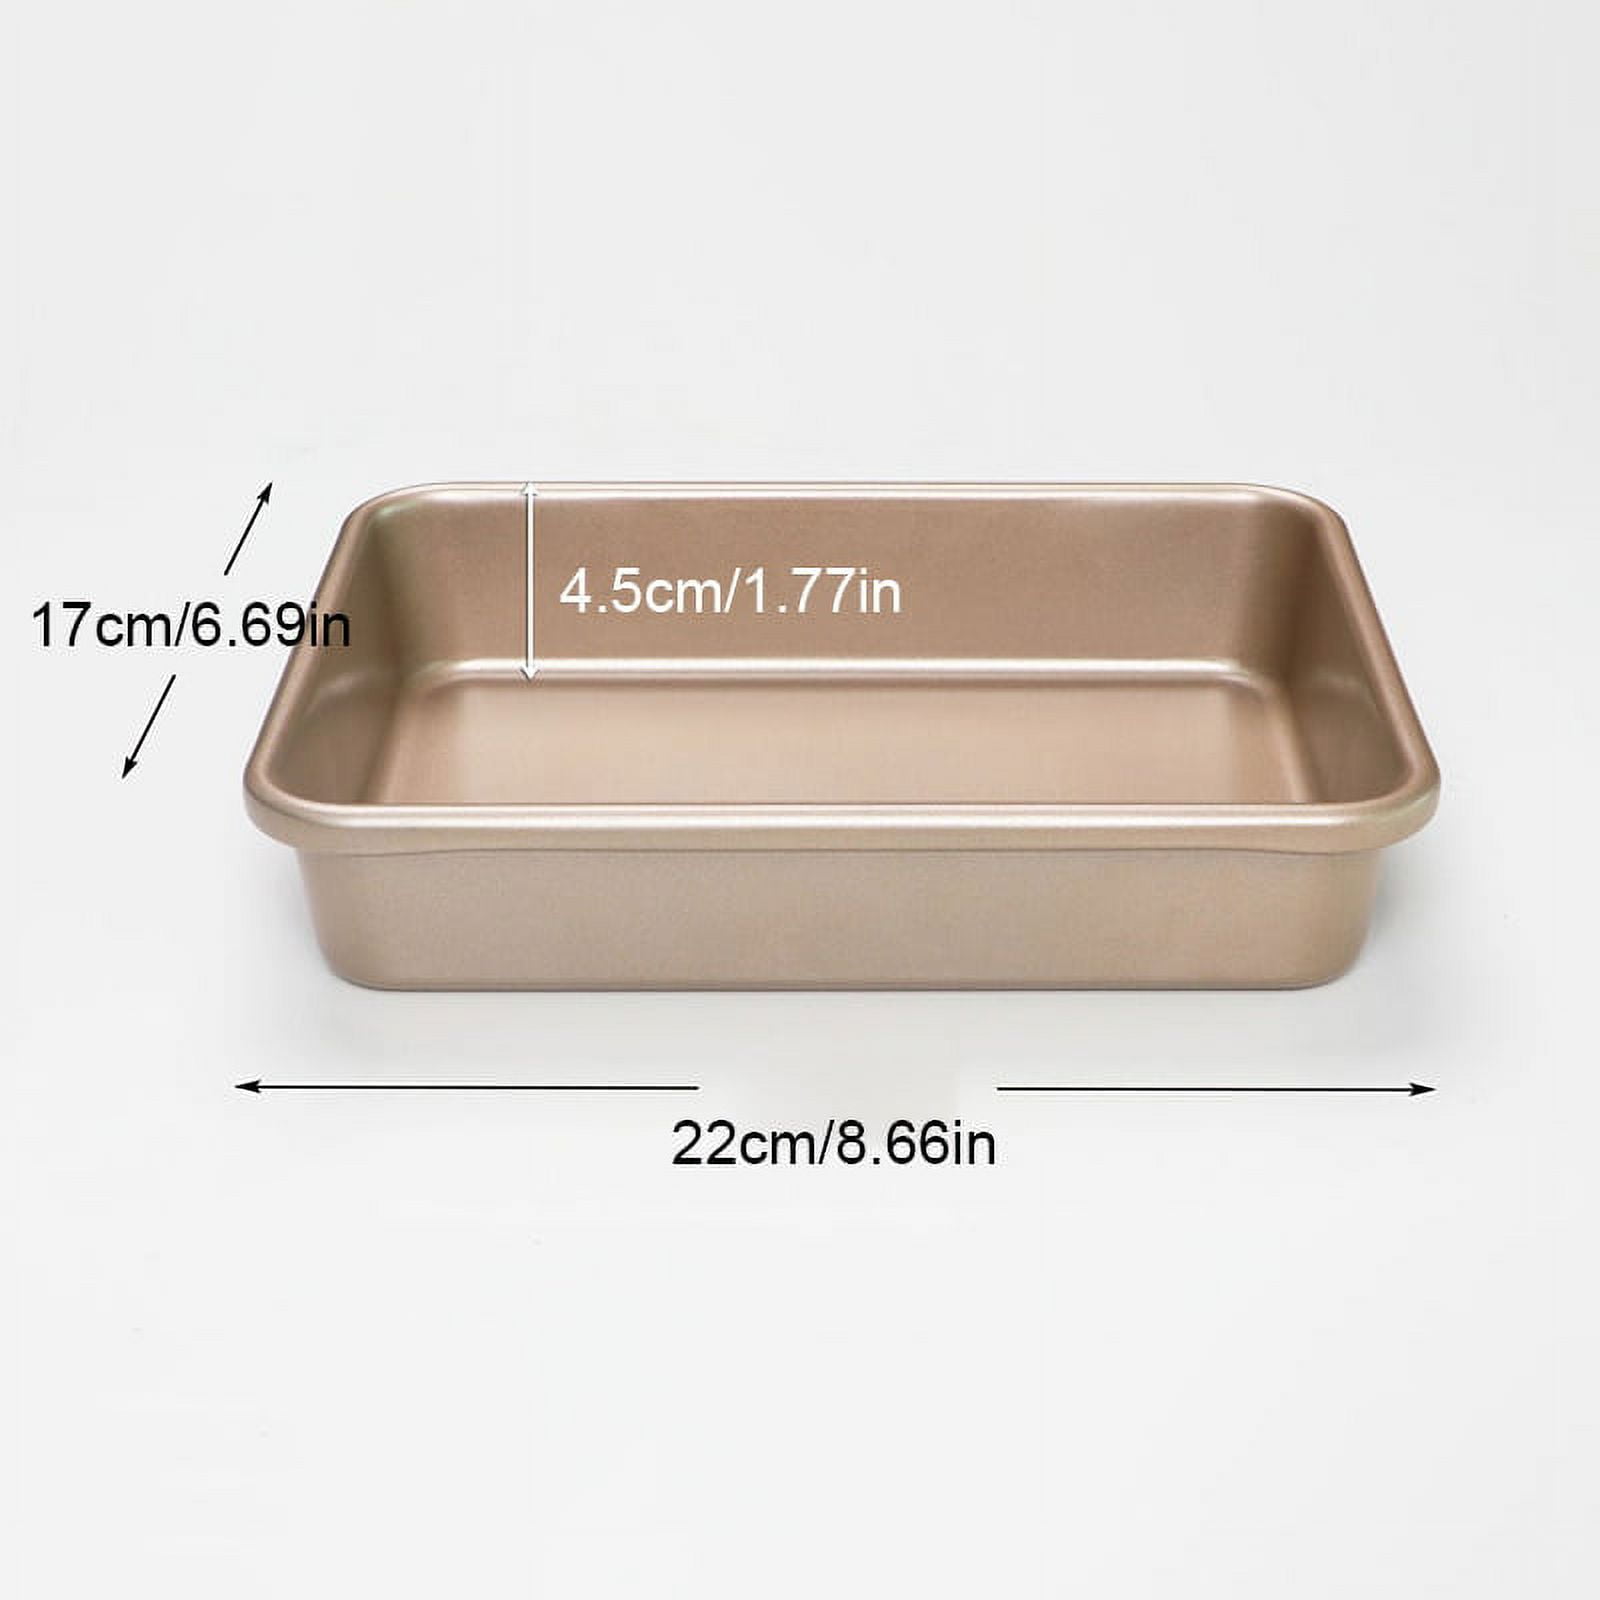 CHEFMADE Non-Stick Mini Loaf Pan, 6 inch, Set of 4, Stainless Steel, Ideal for Baking Bread, Casseroles, Meatloaf, Desserts - Golden